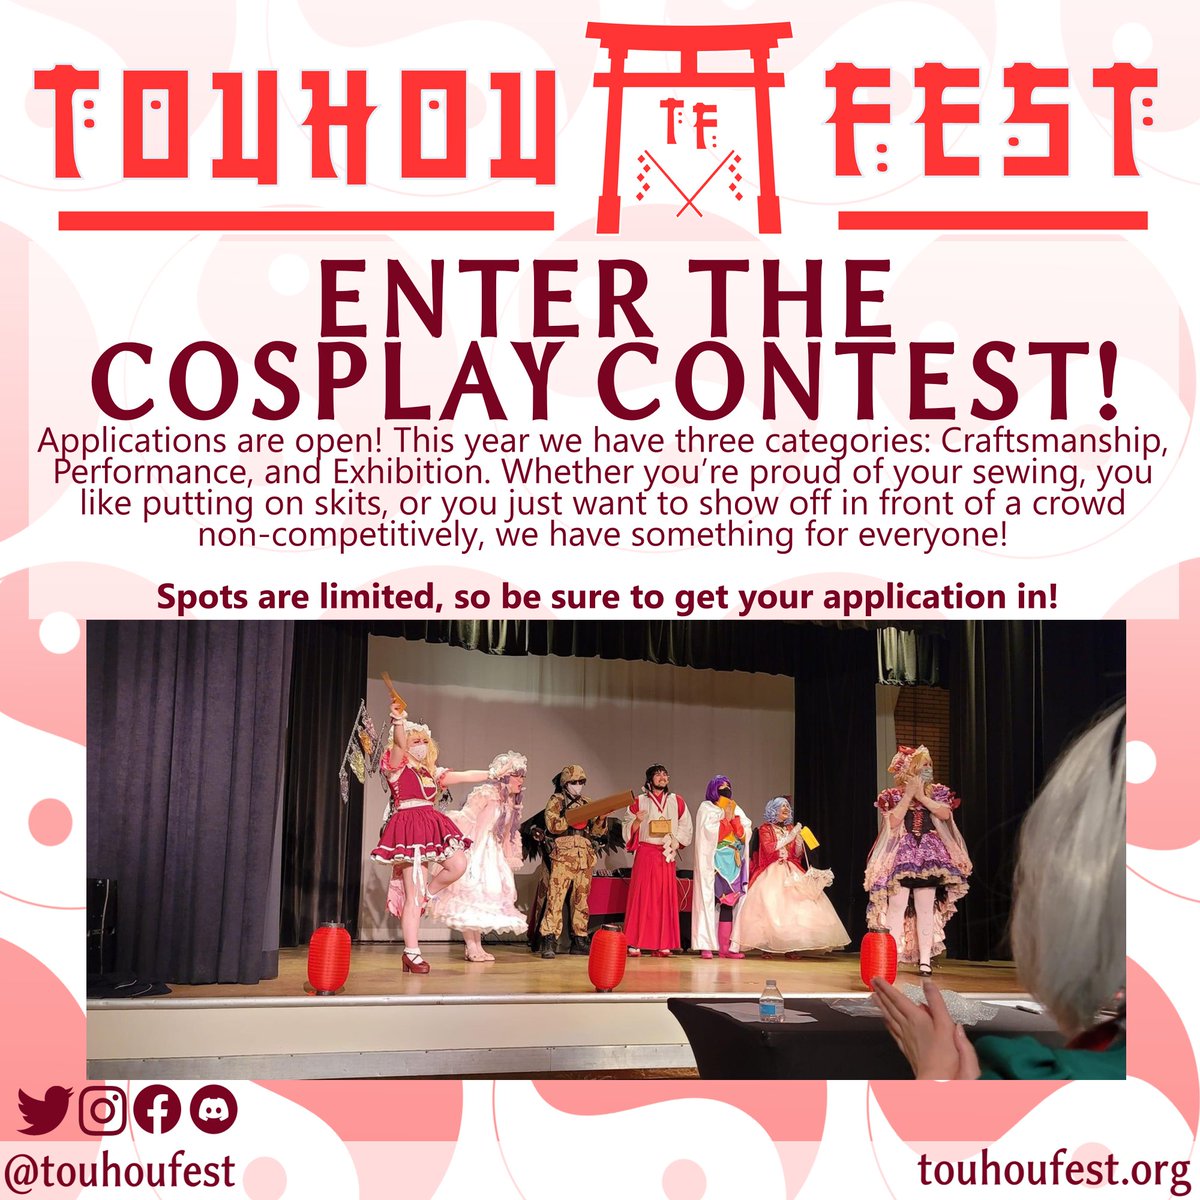 Go to our website to check out the applications for our three categories! Please be sure to read the contest rules before applying. All information and applications can be found here on our official website! touhoufest.org/cosplay